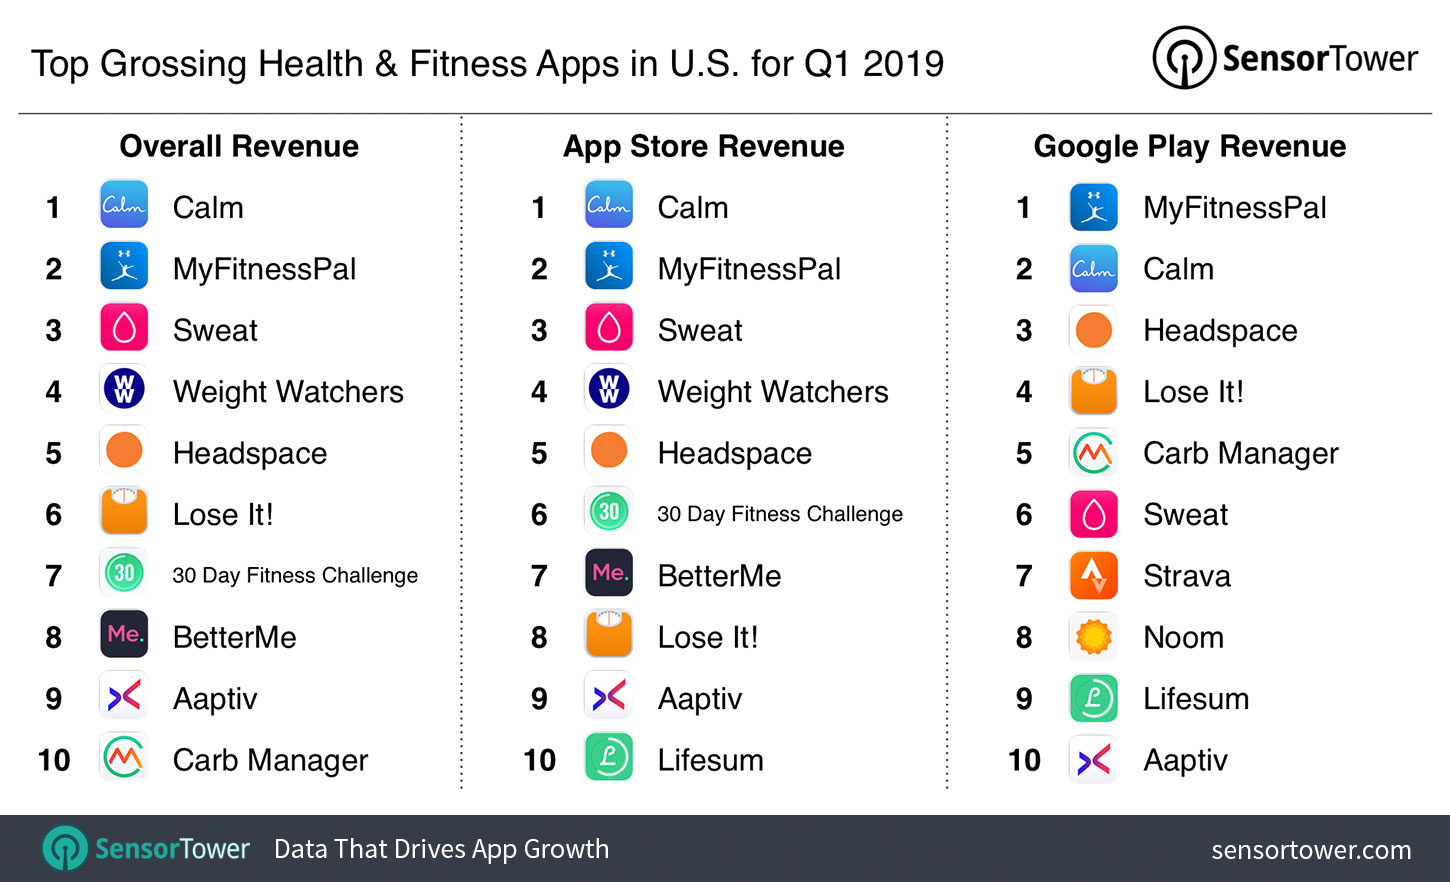 top-grossing-health-and-fitness-apps-us-q1-2019.jpg